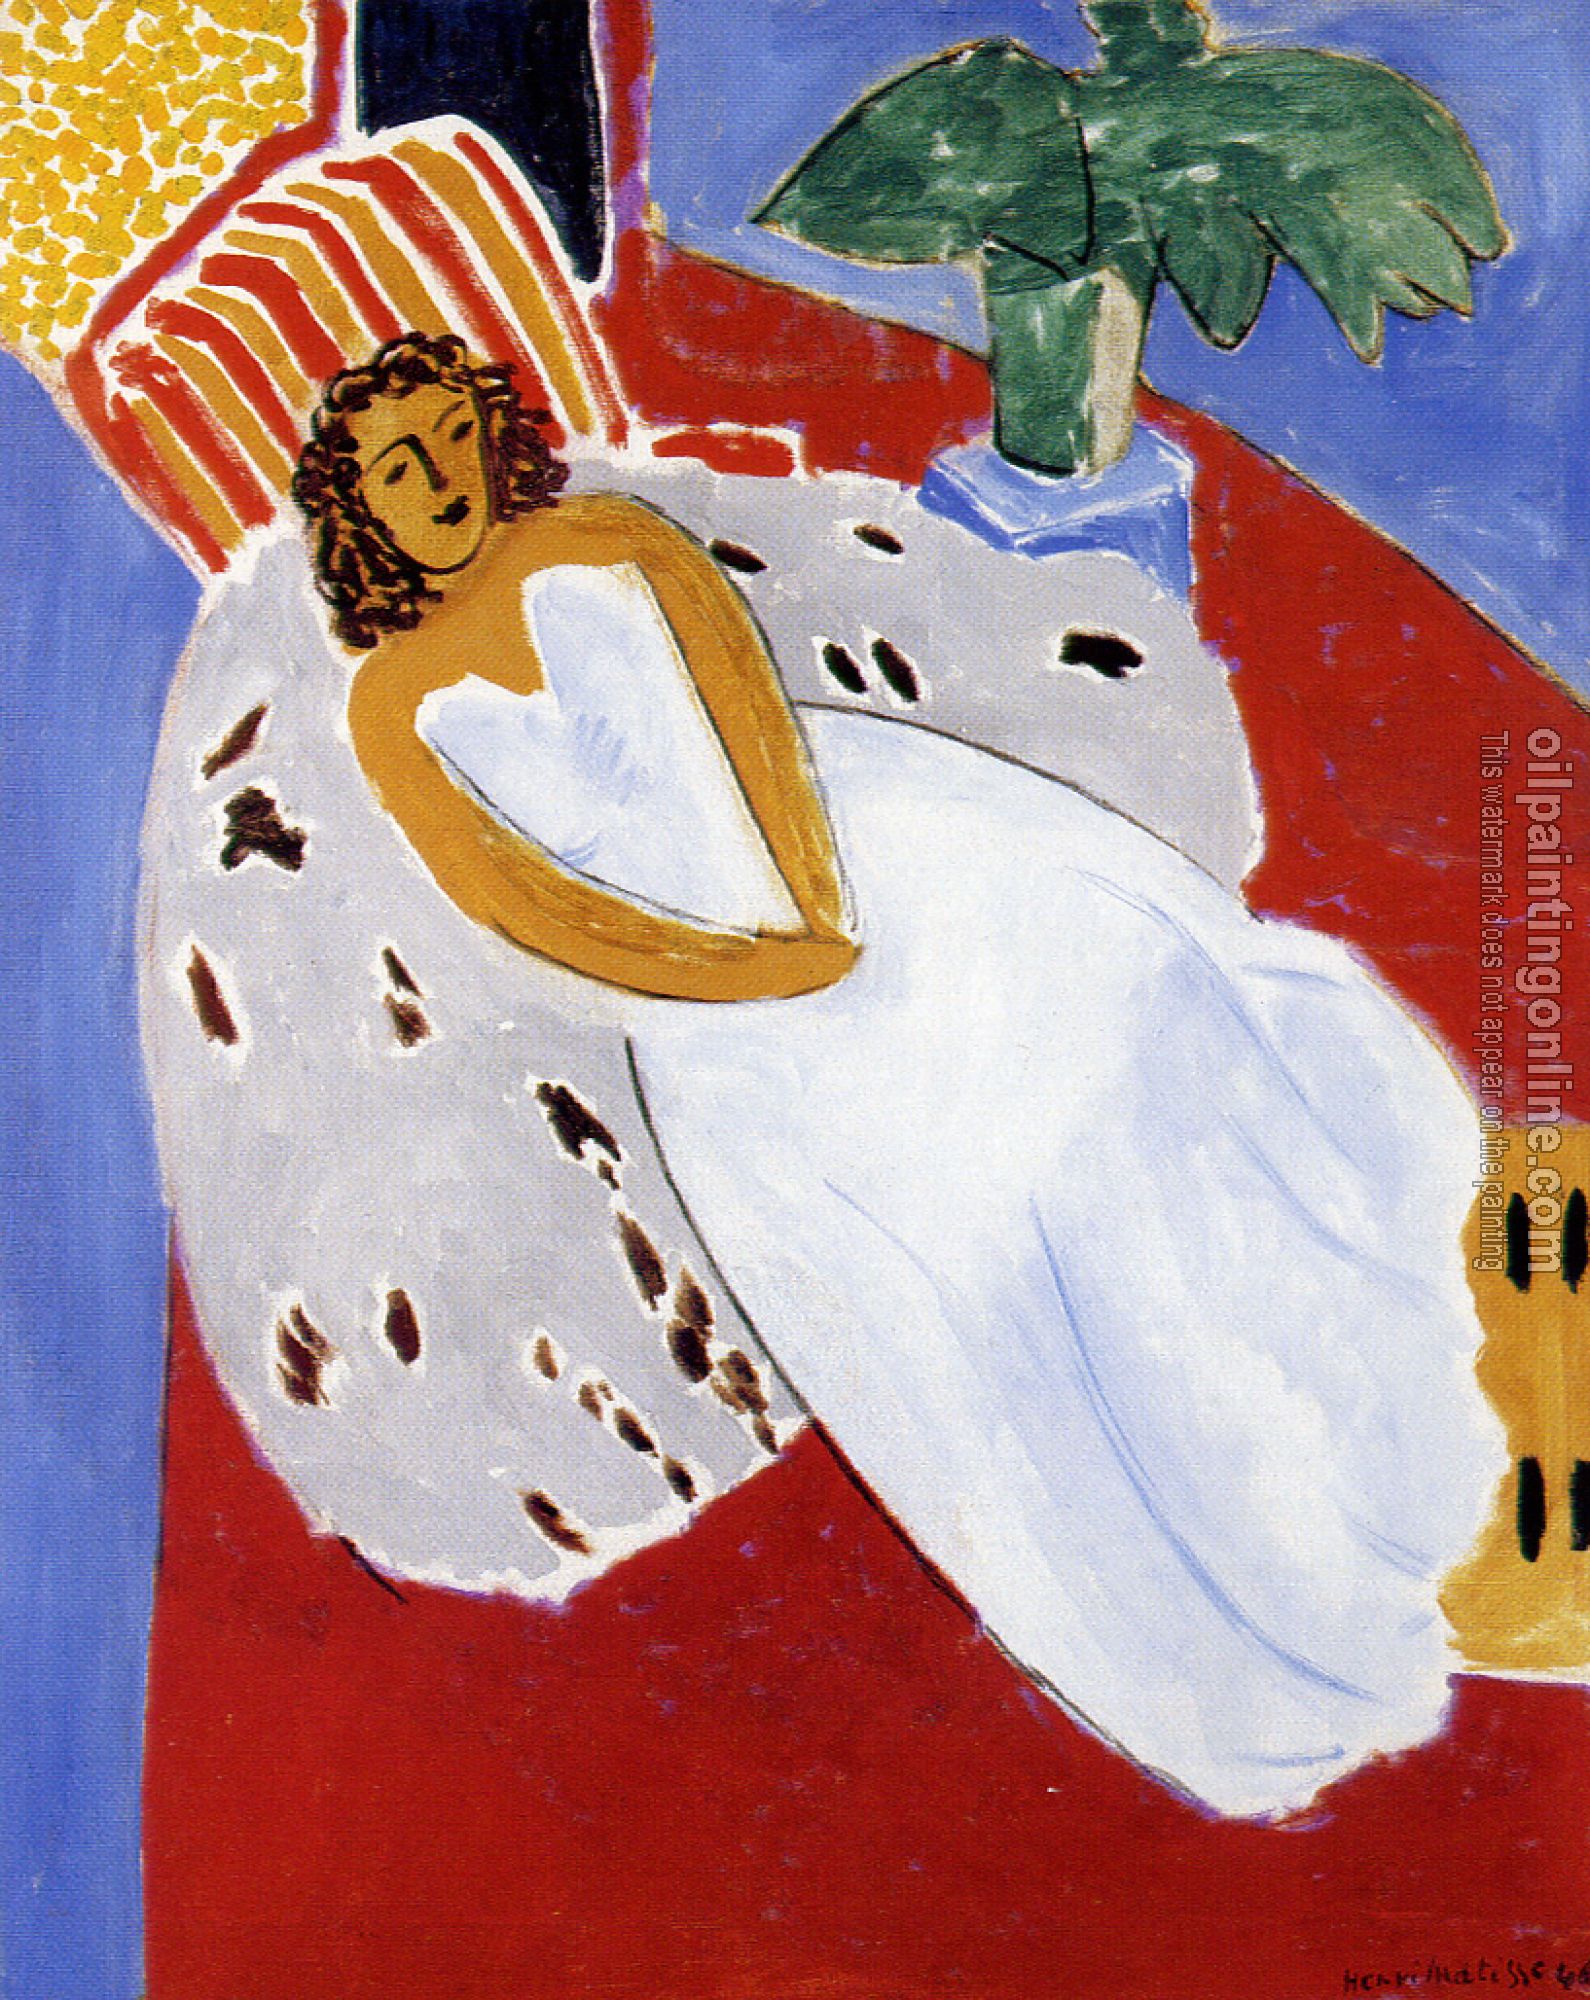 Matisse, Henri Emile Benoit - young woman in white red background